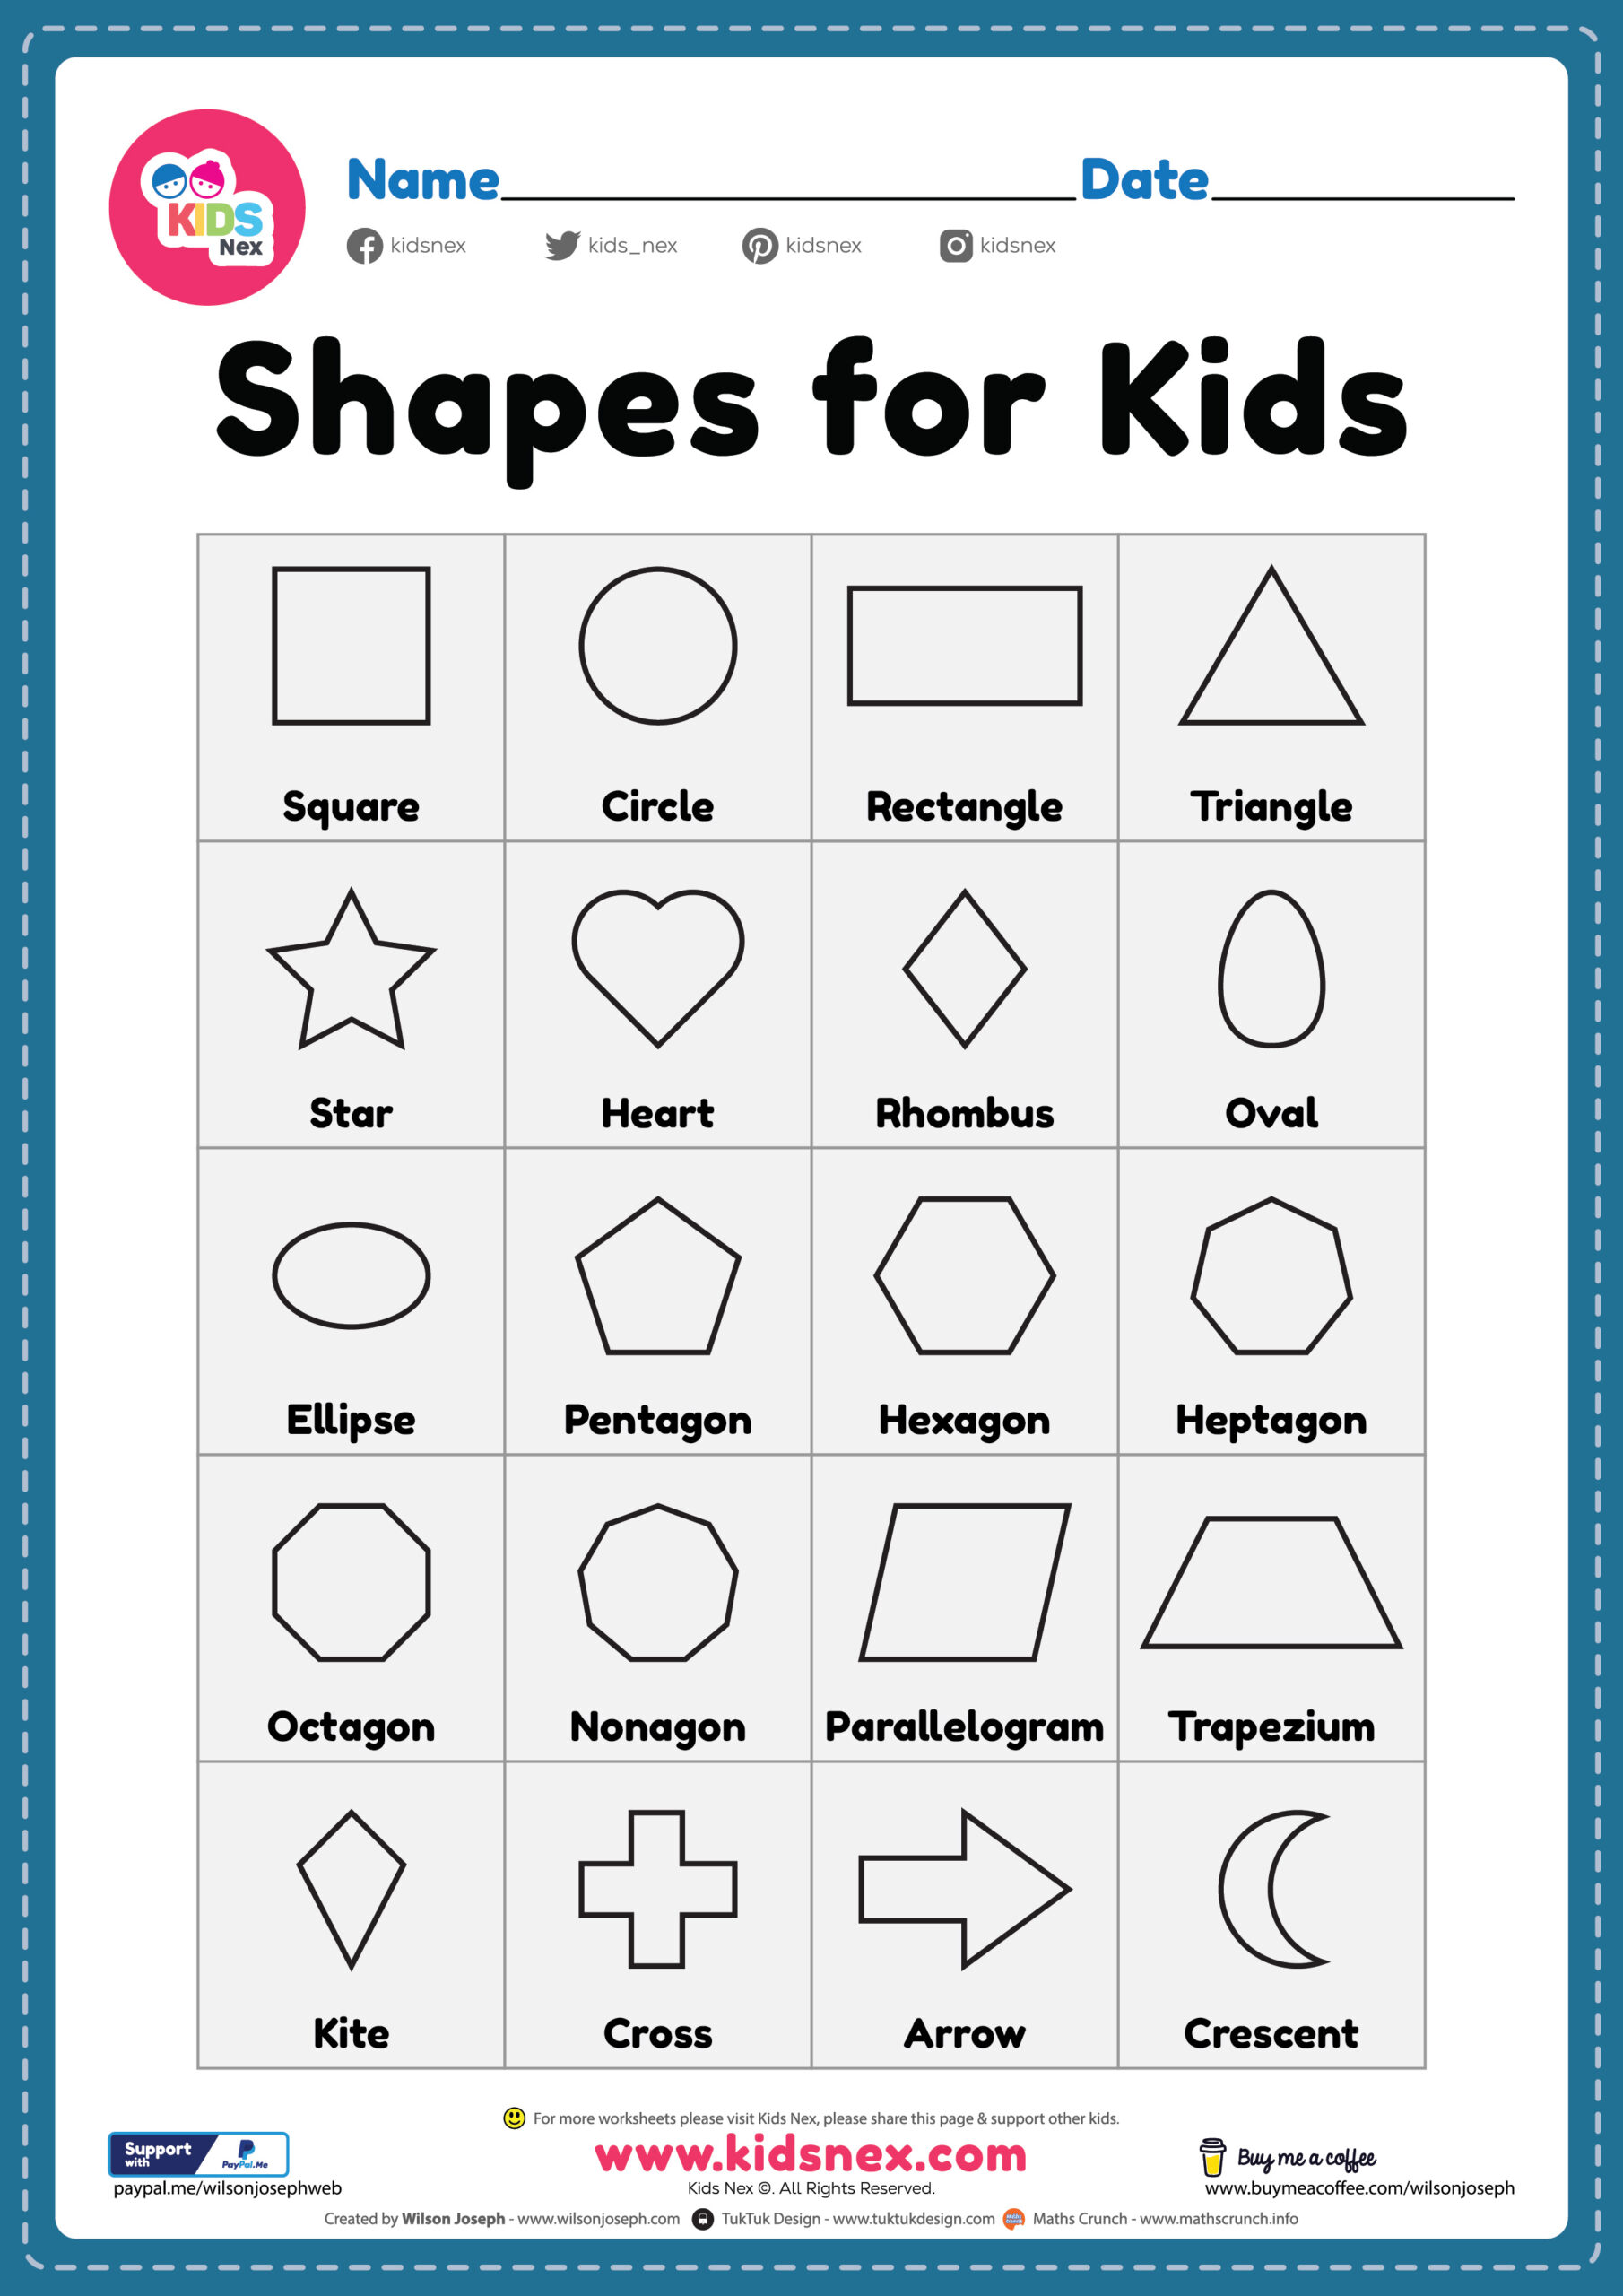 5-best-images-of-printable-shapes-chart-preschool-shapes-chart-basic